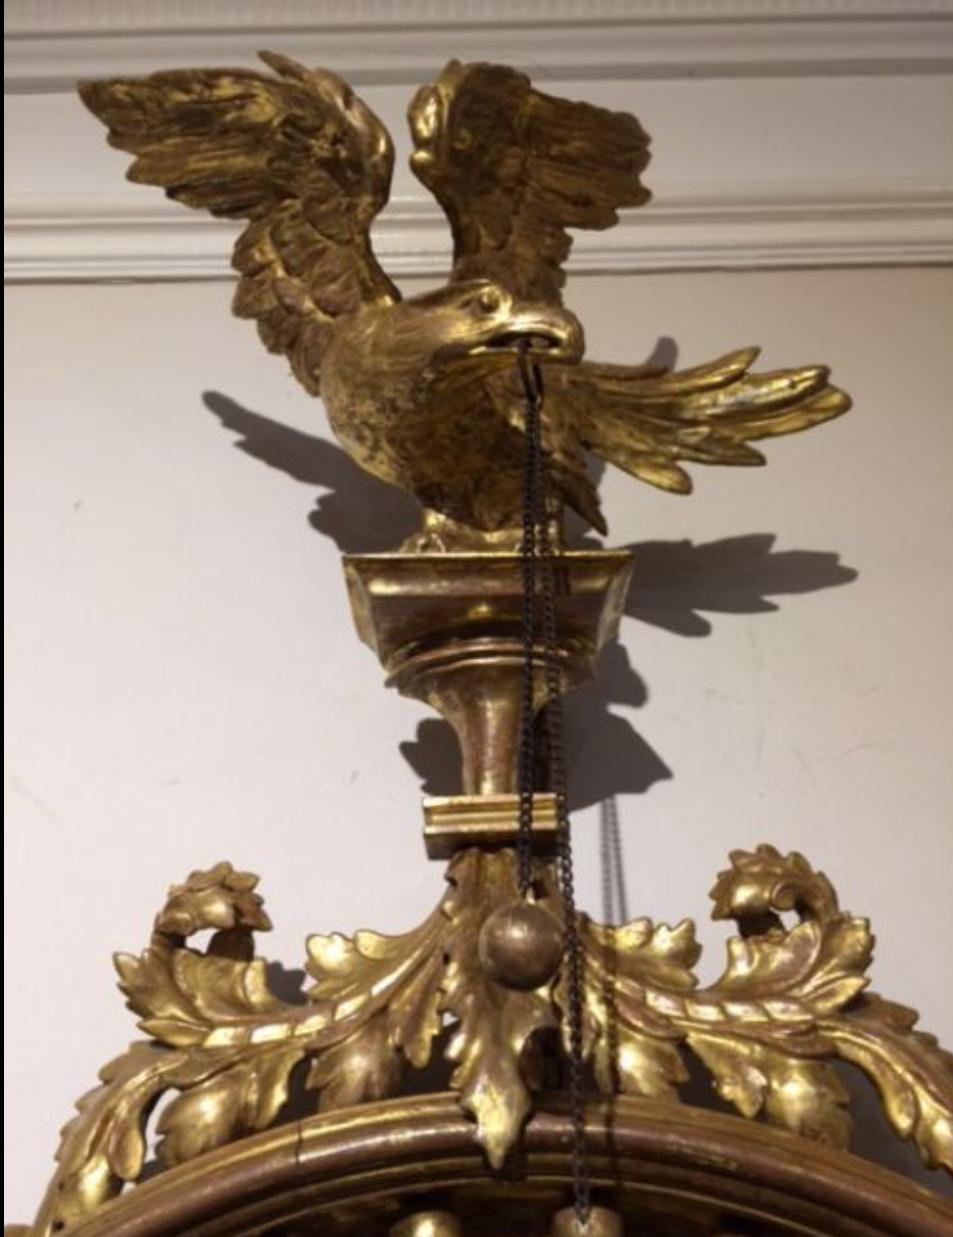 A small gilt and carved convex mirror of the Regency period, decorative moulded frame enhanced by applied gilt spheres and beaded border, ebonised slip within, surmounted by a fine carved eagle holding ball and chains in his beak, set above an